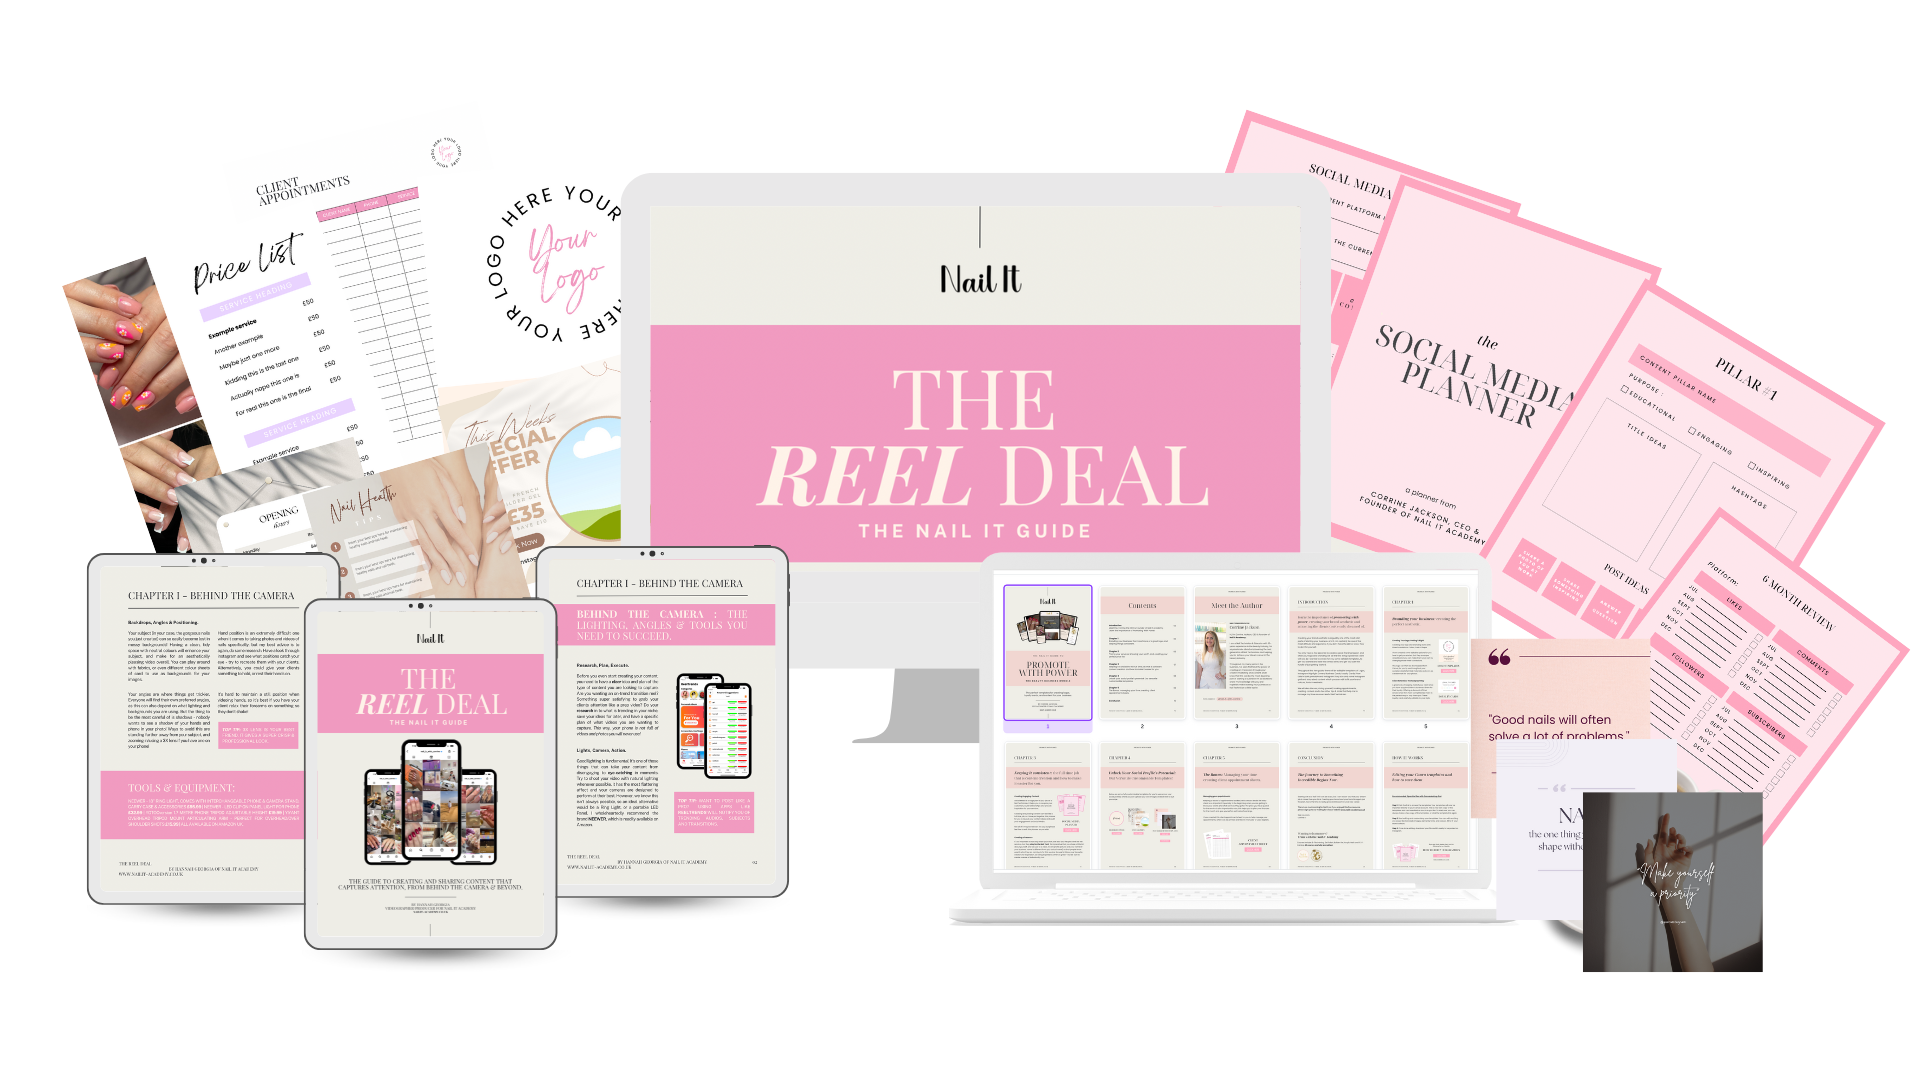 Copy of Promote With Power - Beauty Business Bundle  (Instagram Post (Square)) (Facebook Cover) (1920 × 1080px).png__PID:955e23a5-098b-476b-a60d-0fb25f06bfba